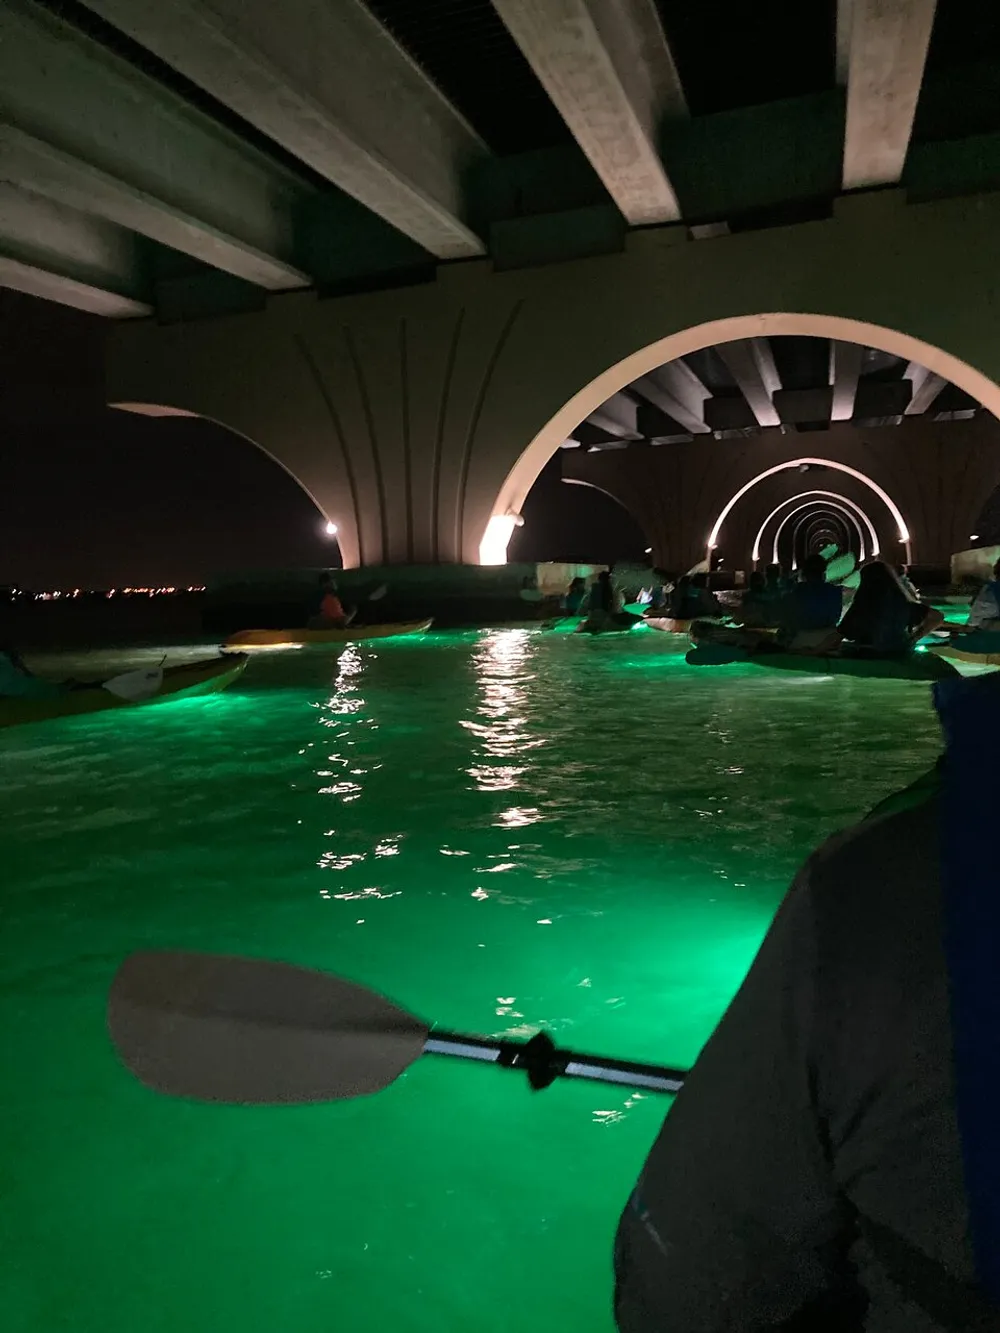 This image depicts a group of kayakers paddling under a bridge at night illuminated by green lights reflected on the water